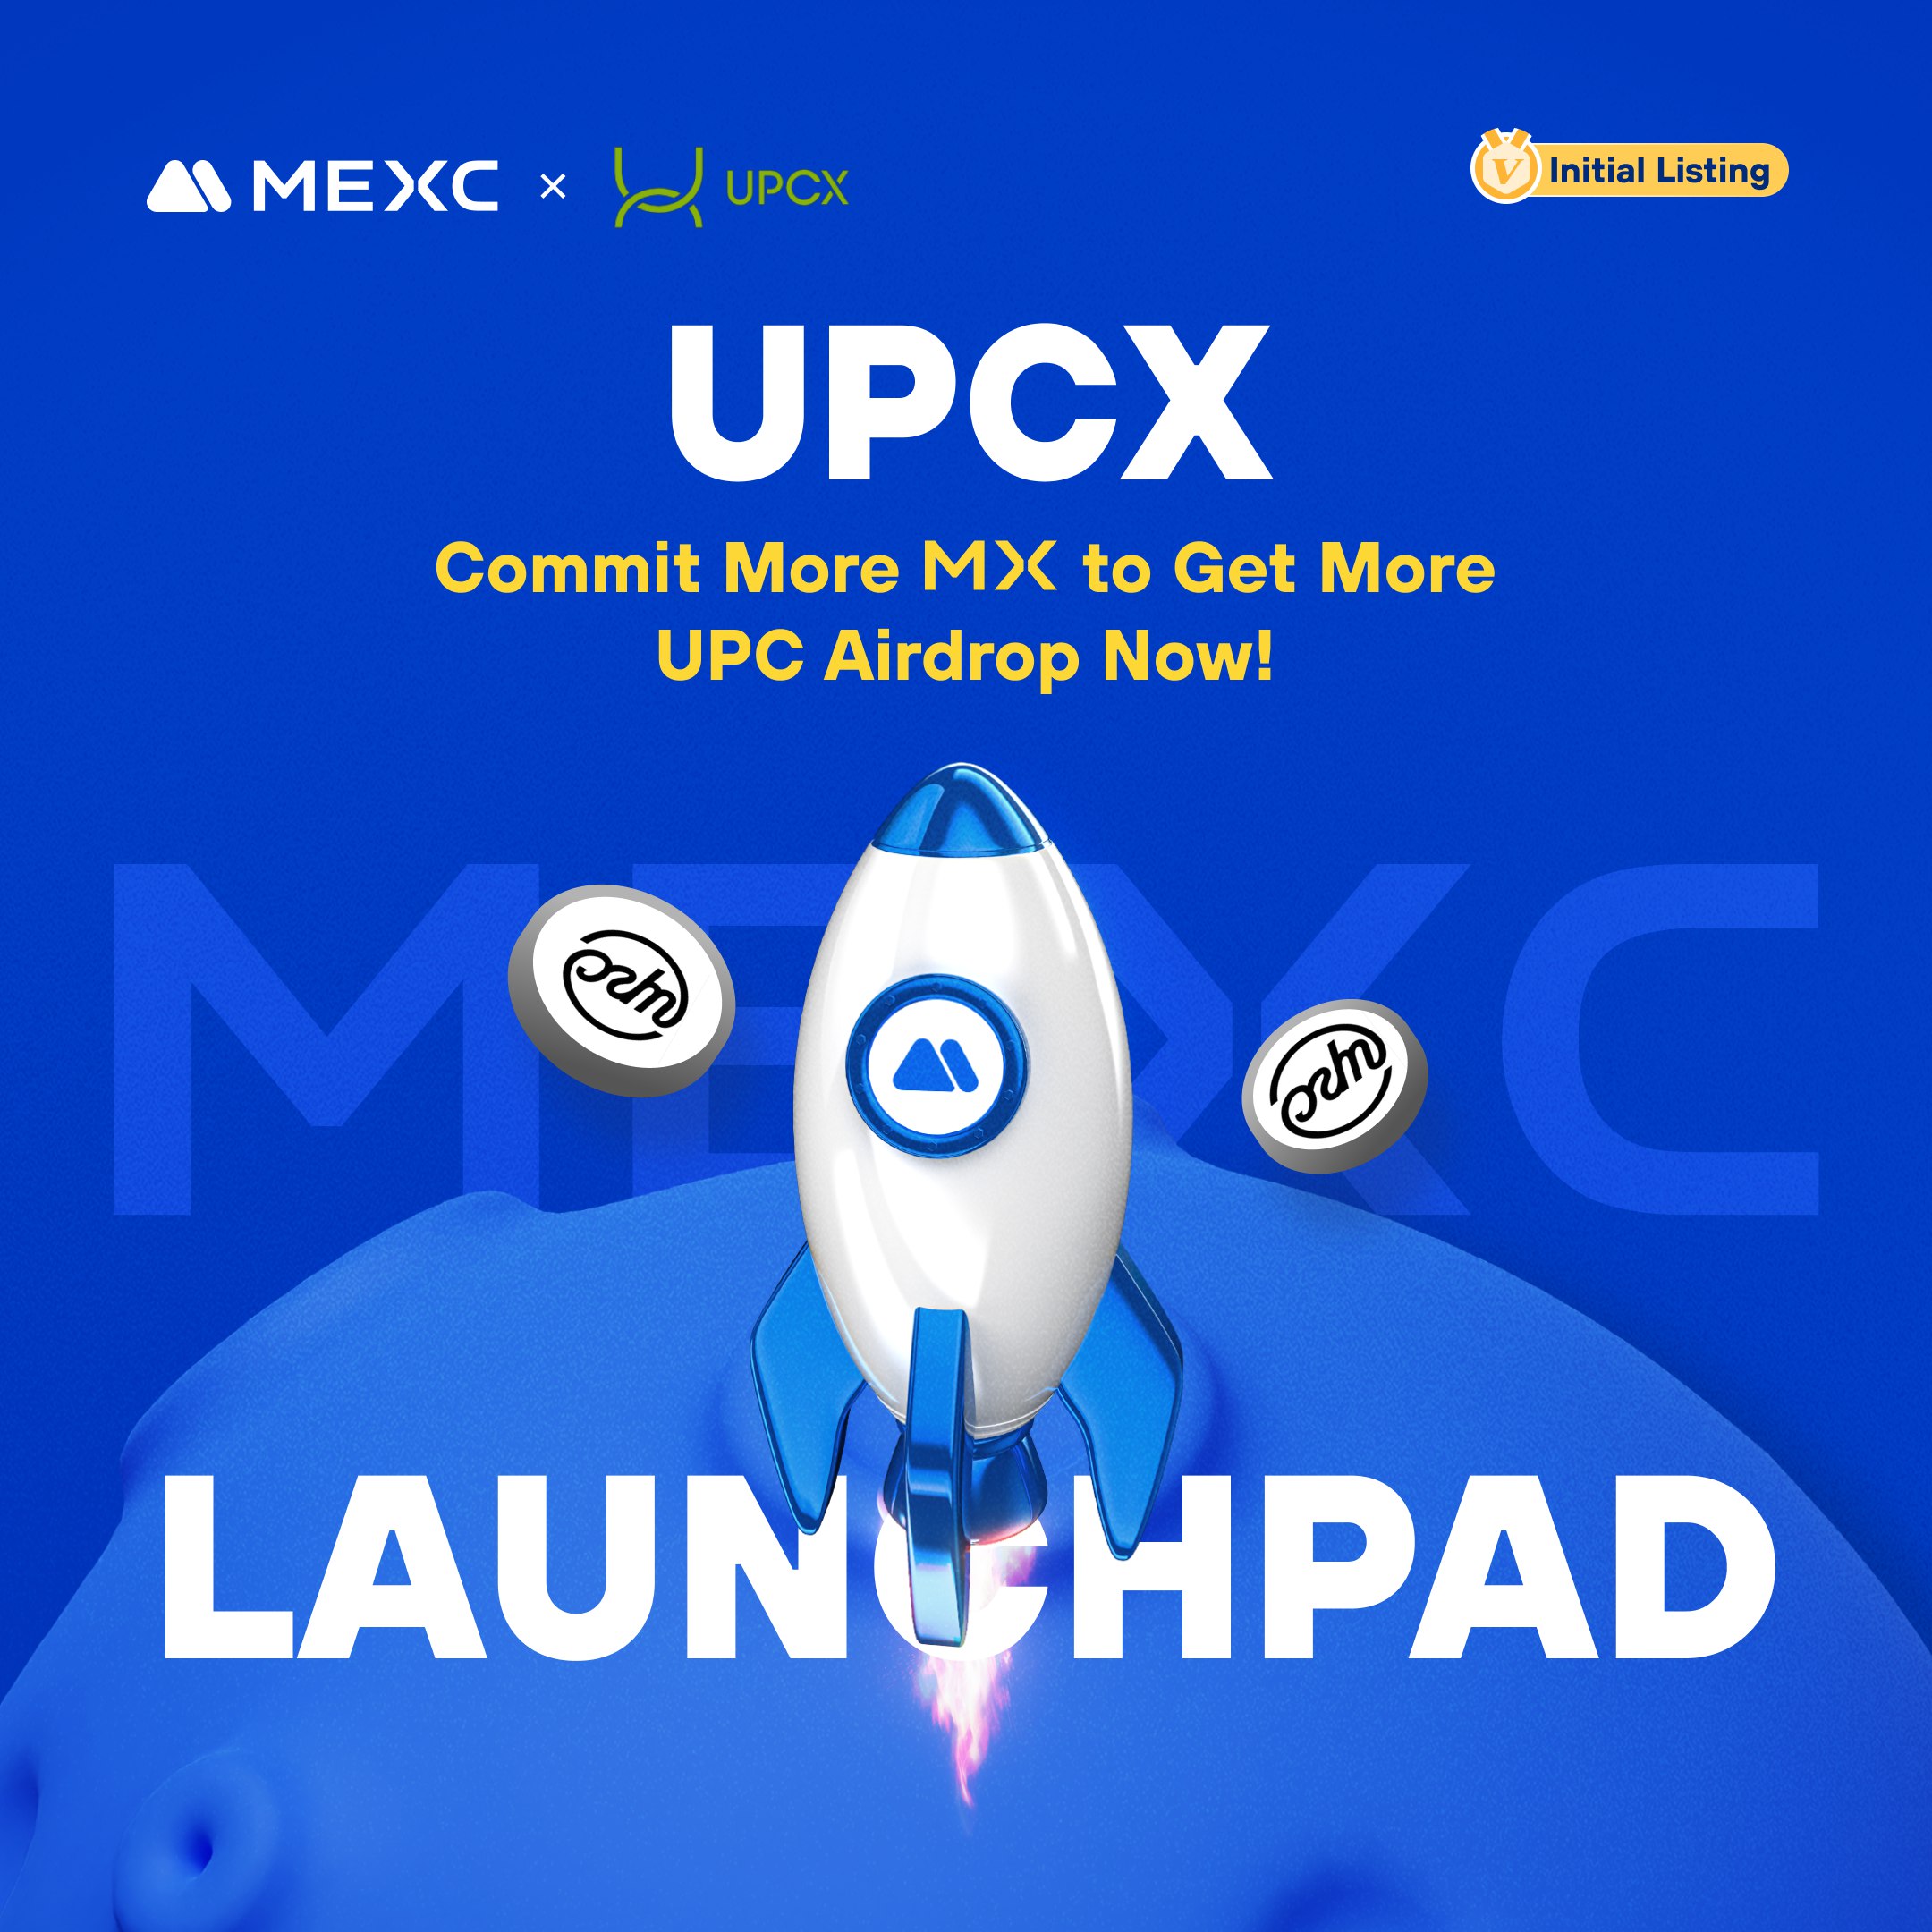 UPCX (UPC) token is set to be listed on the MEXC trading platform soon.